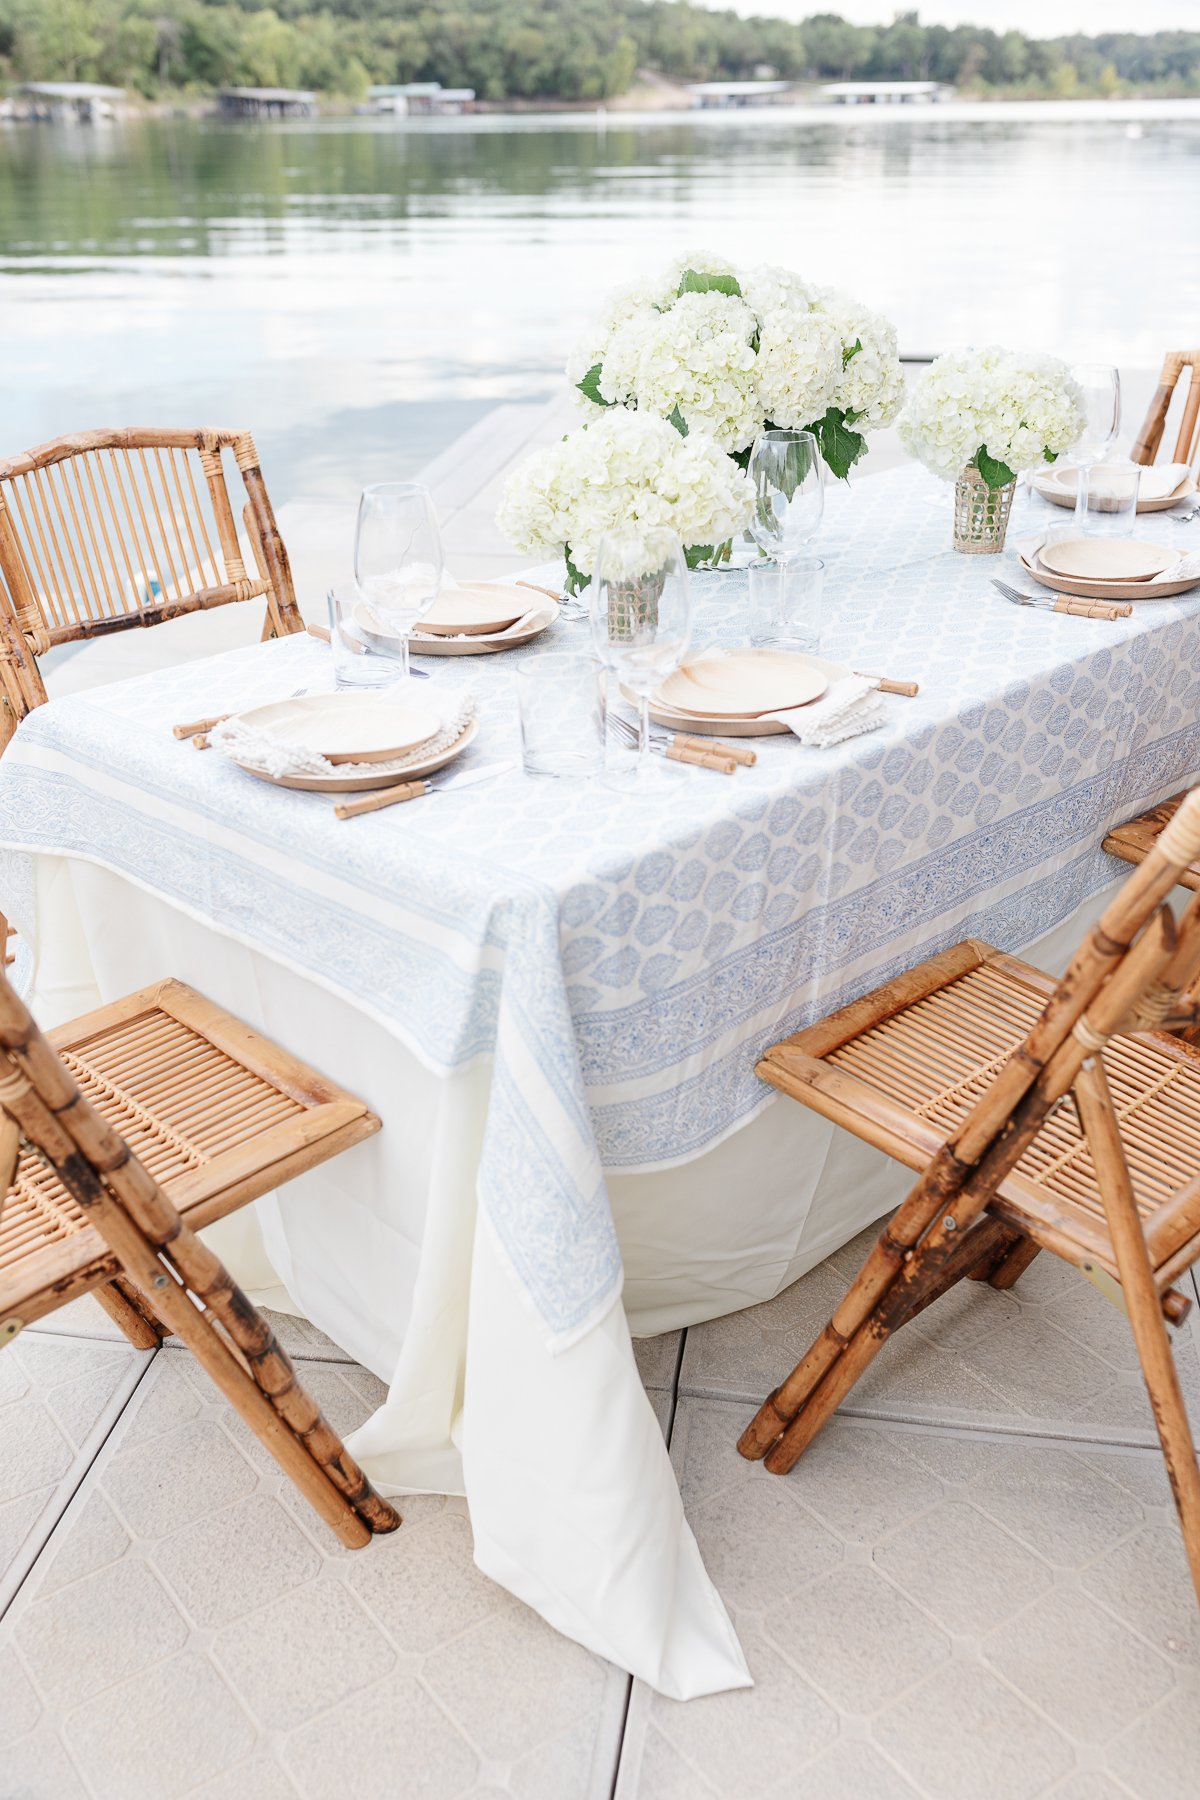 A table set up with bamboo dining chairs and water views for al fresco dining.